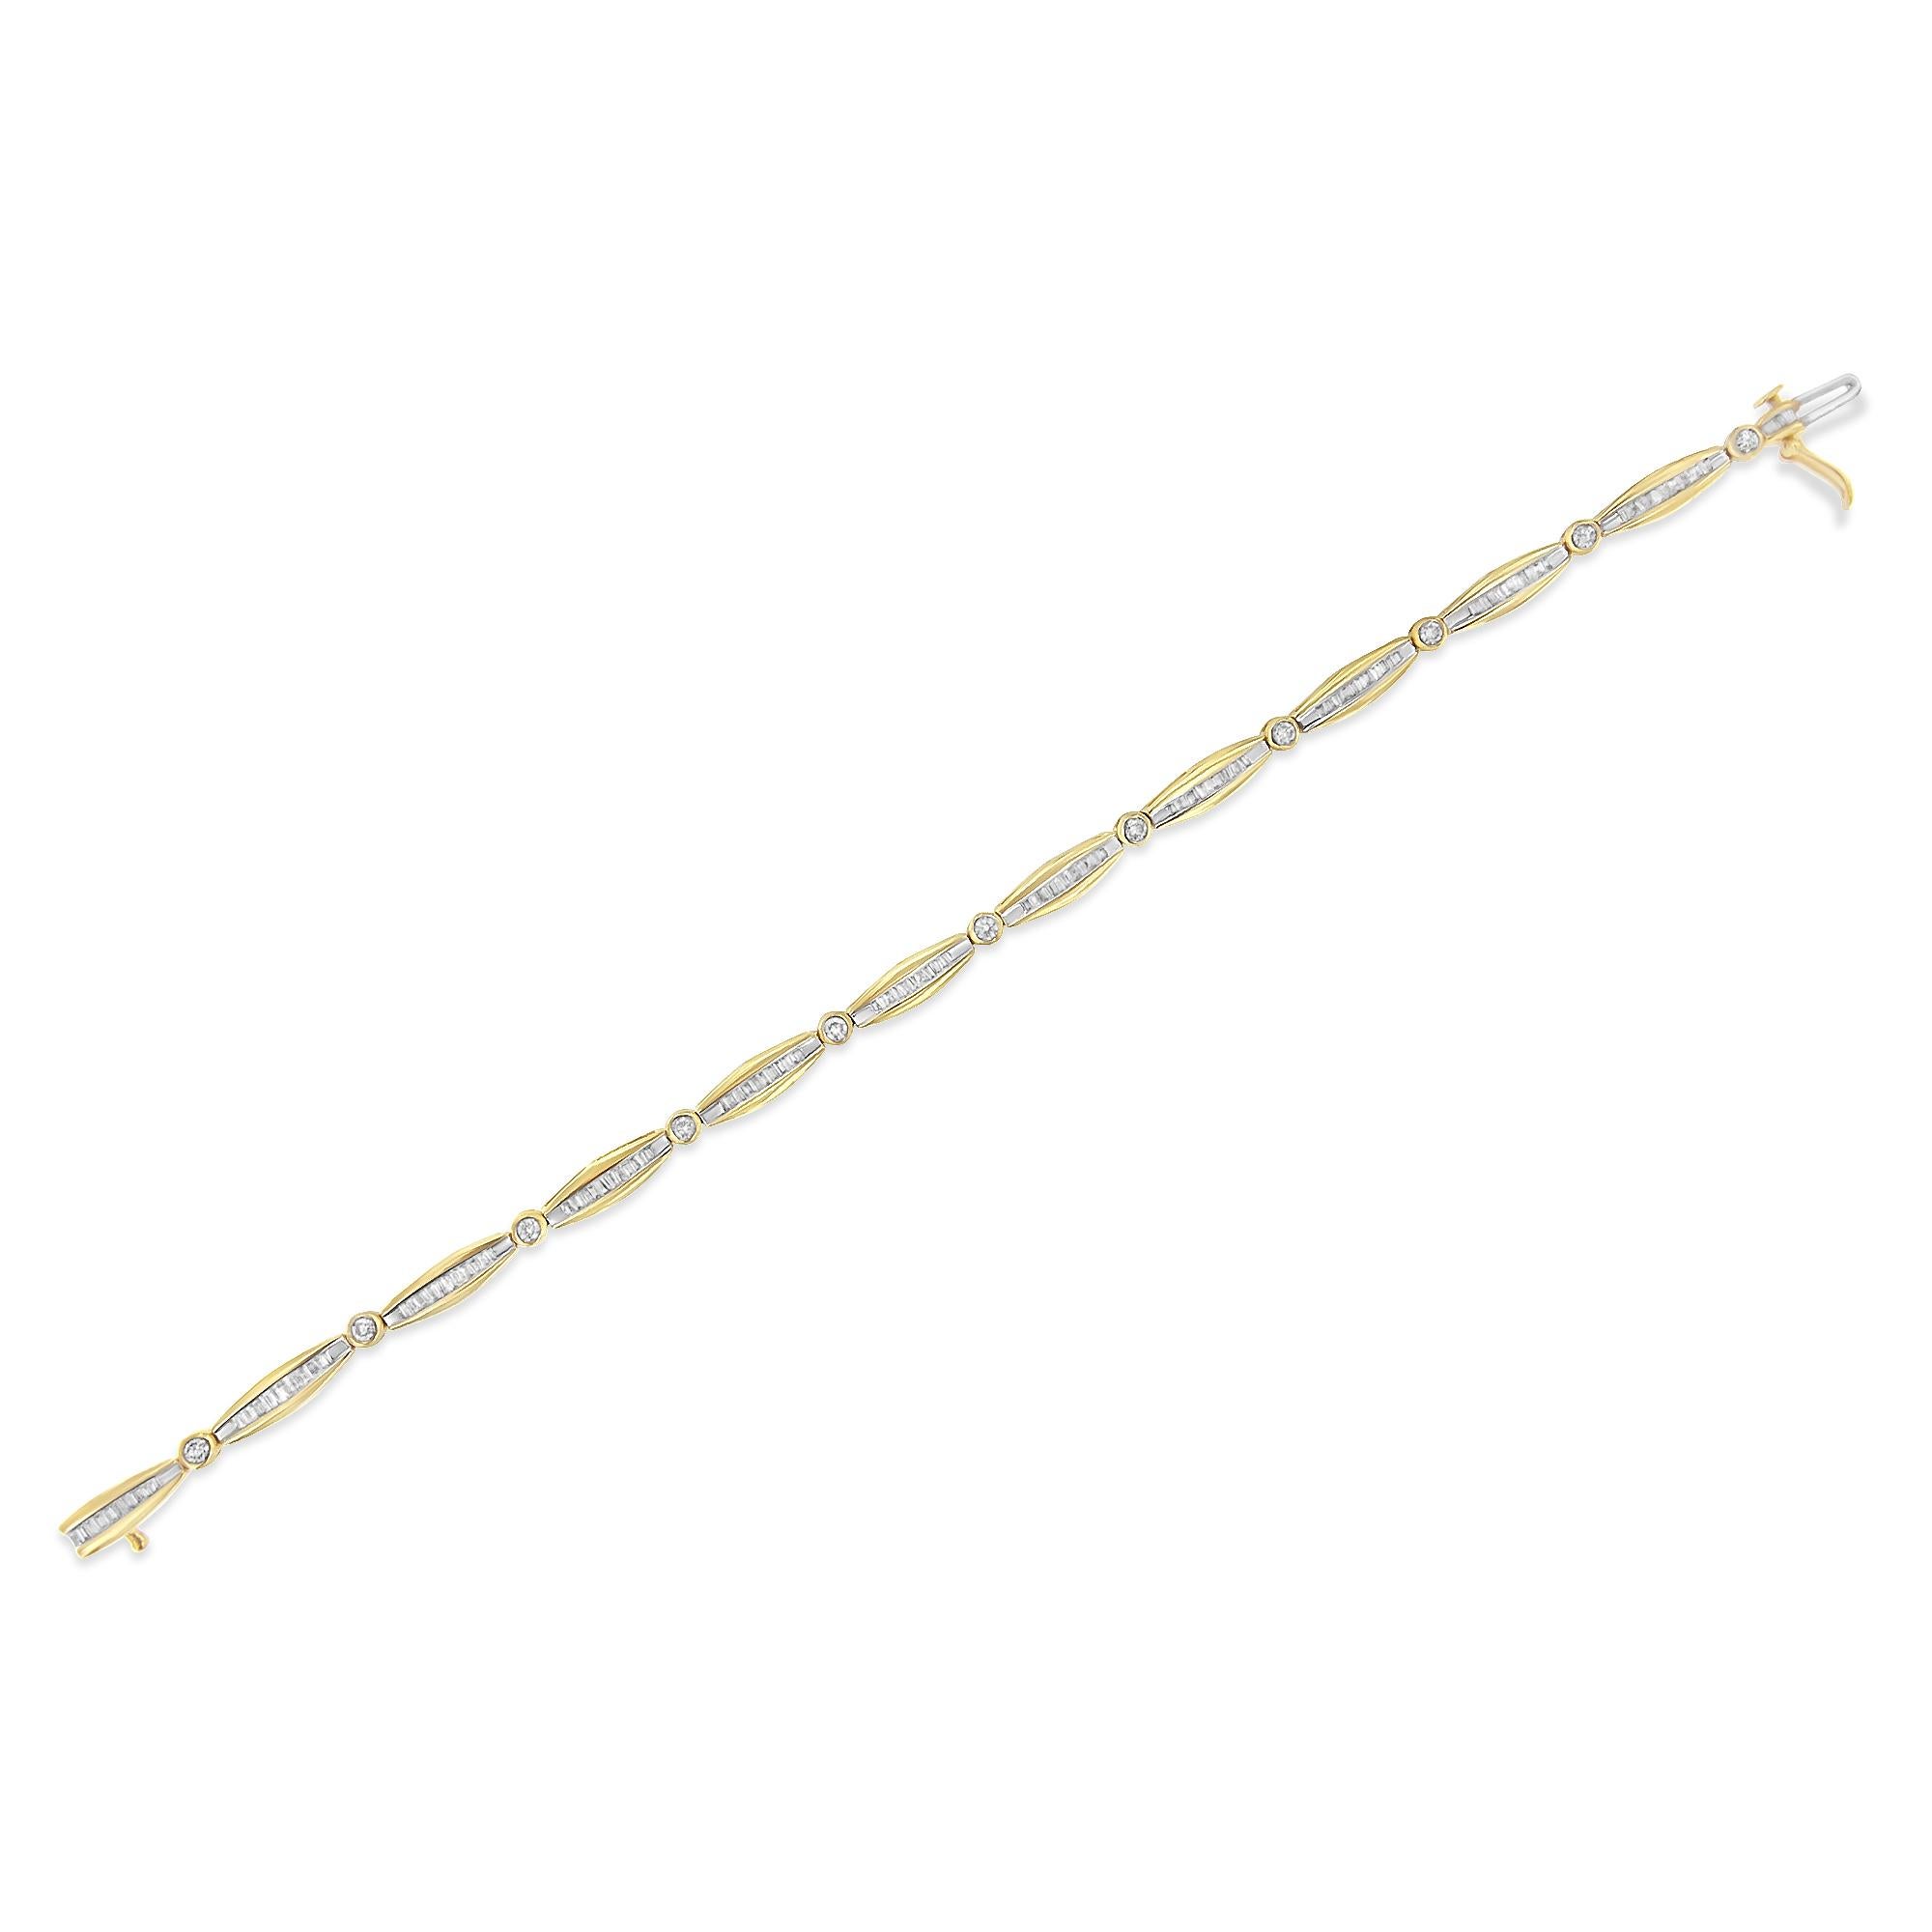 14K Yellow Gold 1-1/2 Carat Round Diamond Bezel and Tapered Link Tennis Bracelet In Fair Condition For Sale In New York, NY